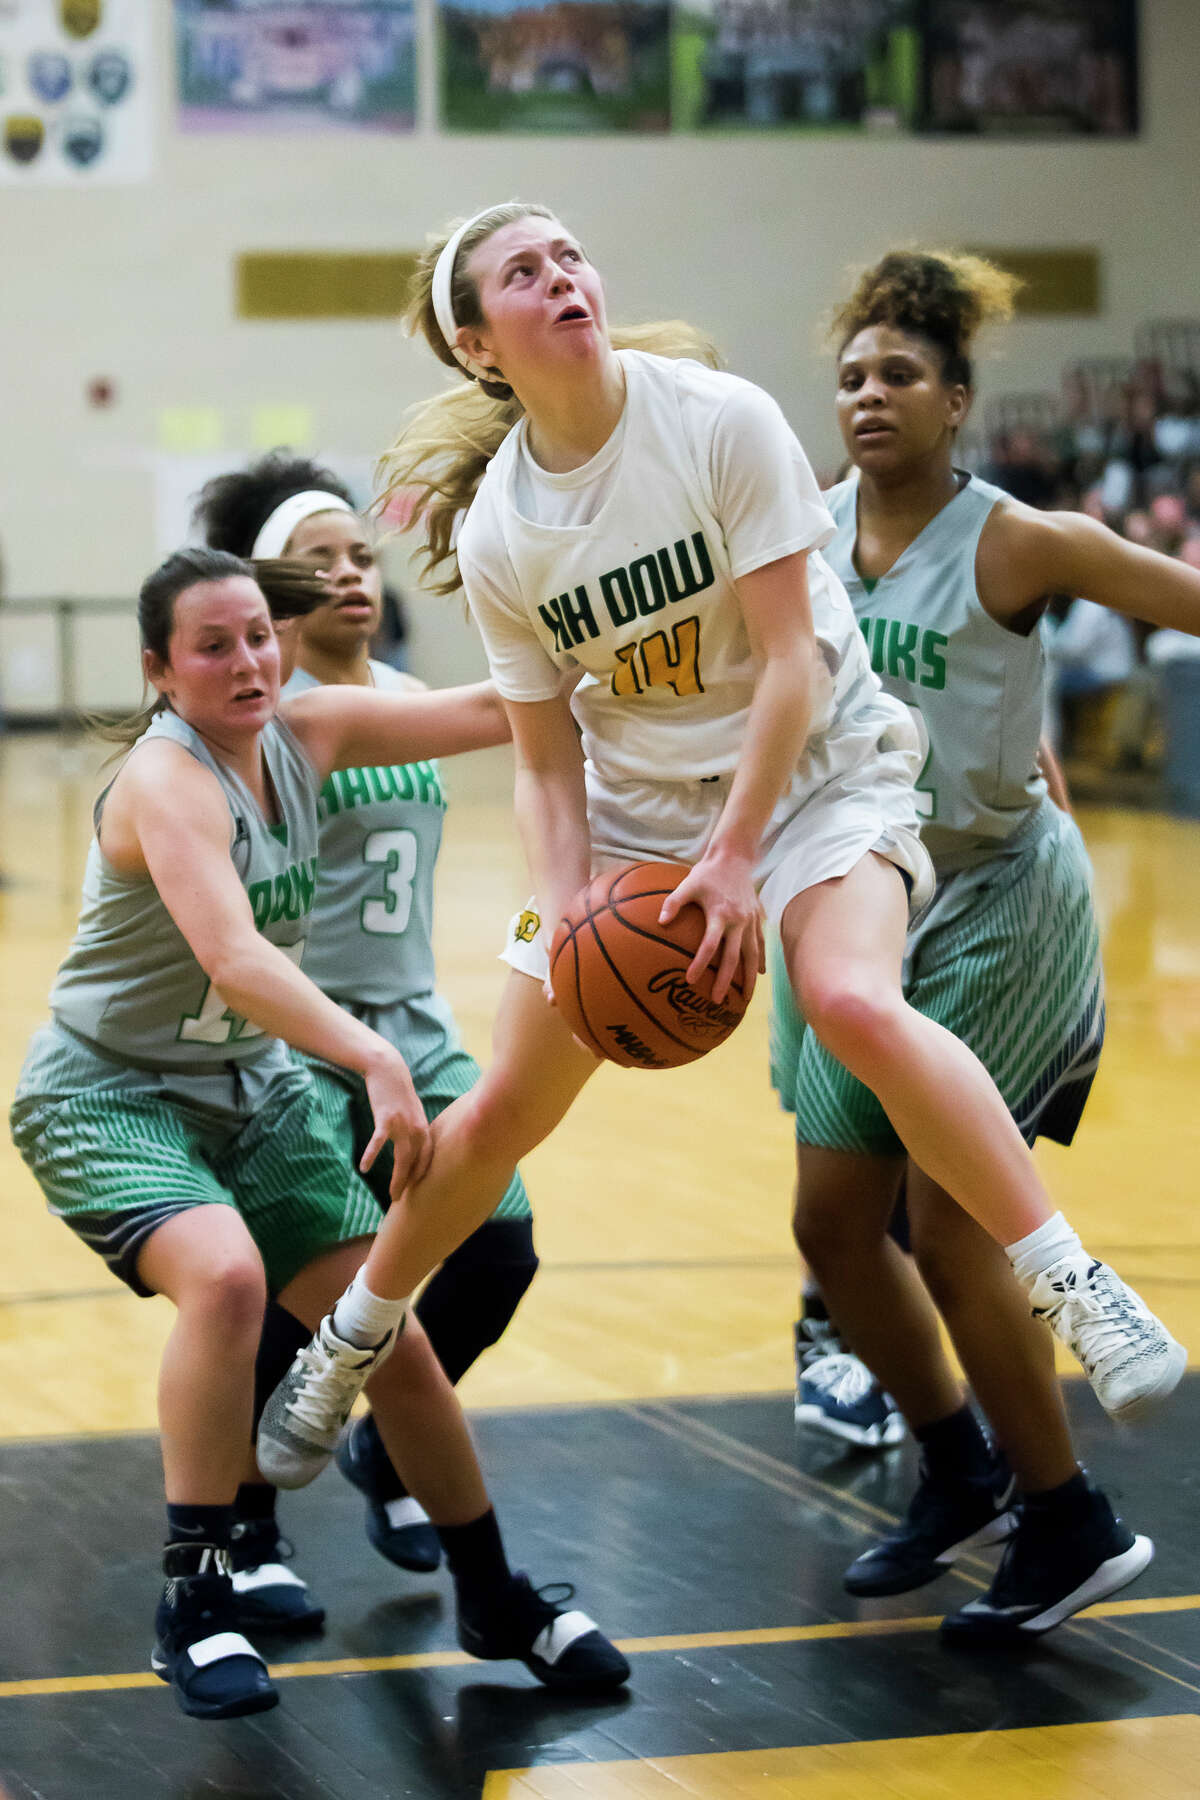 Dow's Molly Davis takes a shot during the Chargers' 49-34 Division 1 regional finals loss to Saginaw Heritage on Wednesday, March 13, 2019 at Bay City Western High School. (Katy Kildee/kkildee@mdn.net)